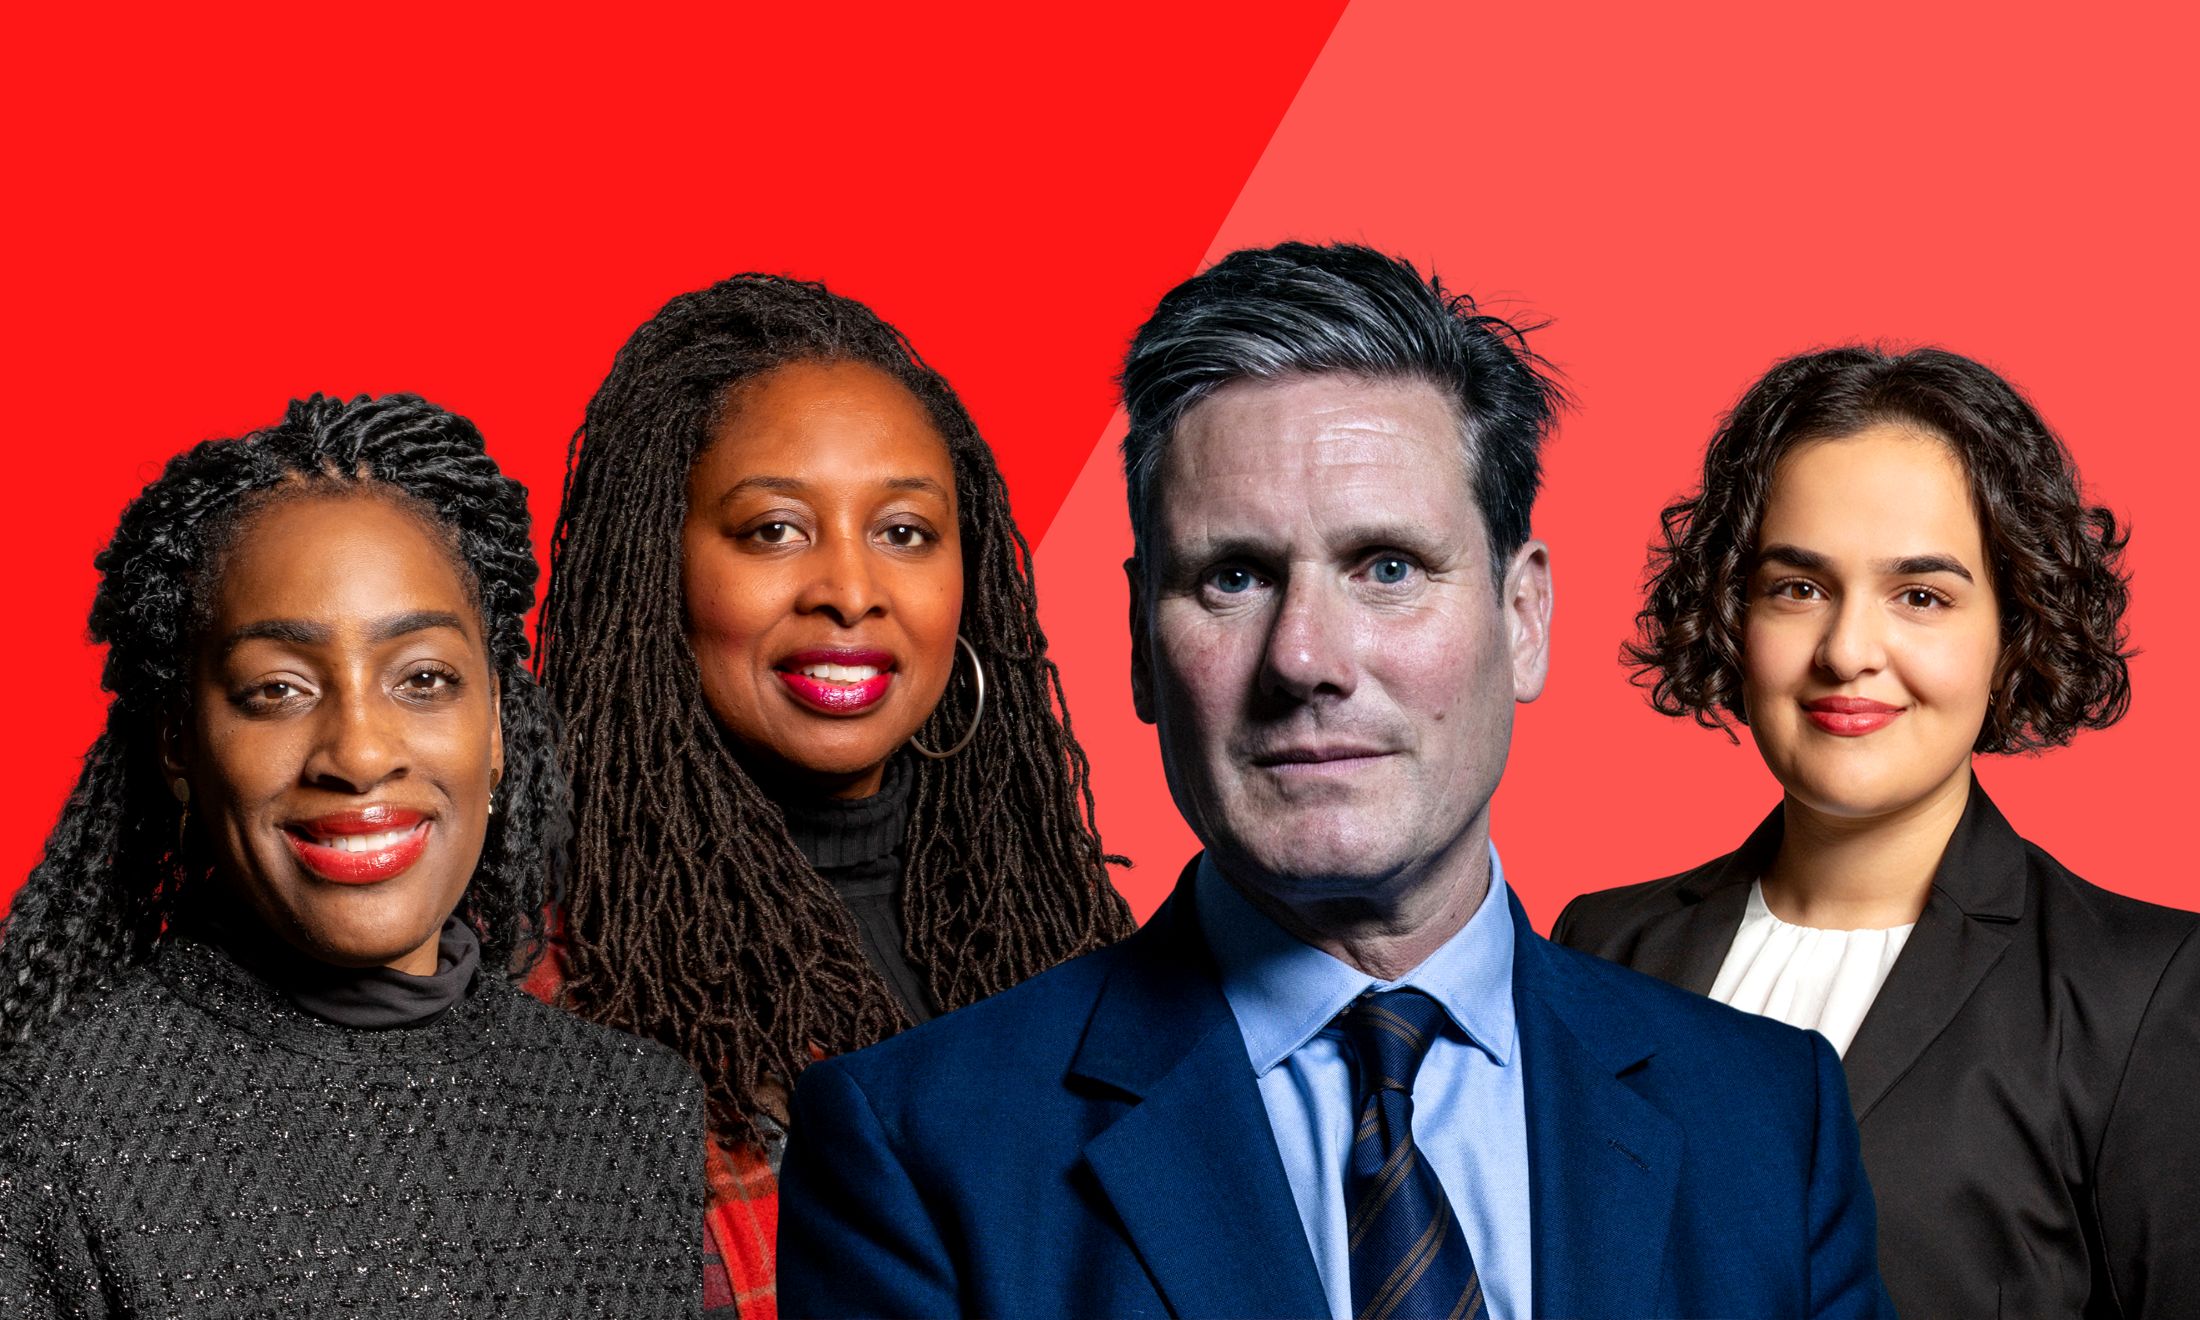 ‘Nothing was done’: Labour members call out Starmer’s inaction on racism